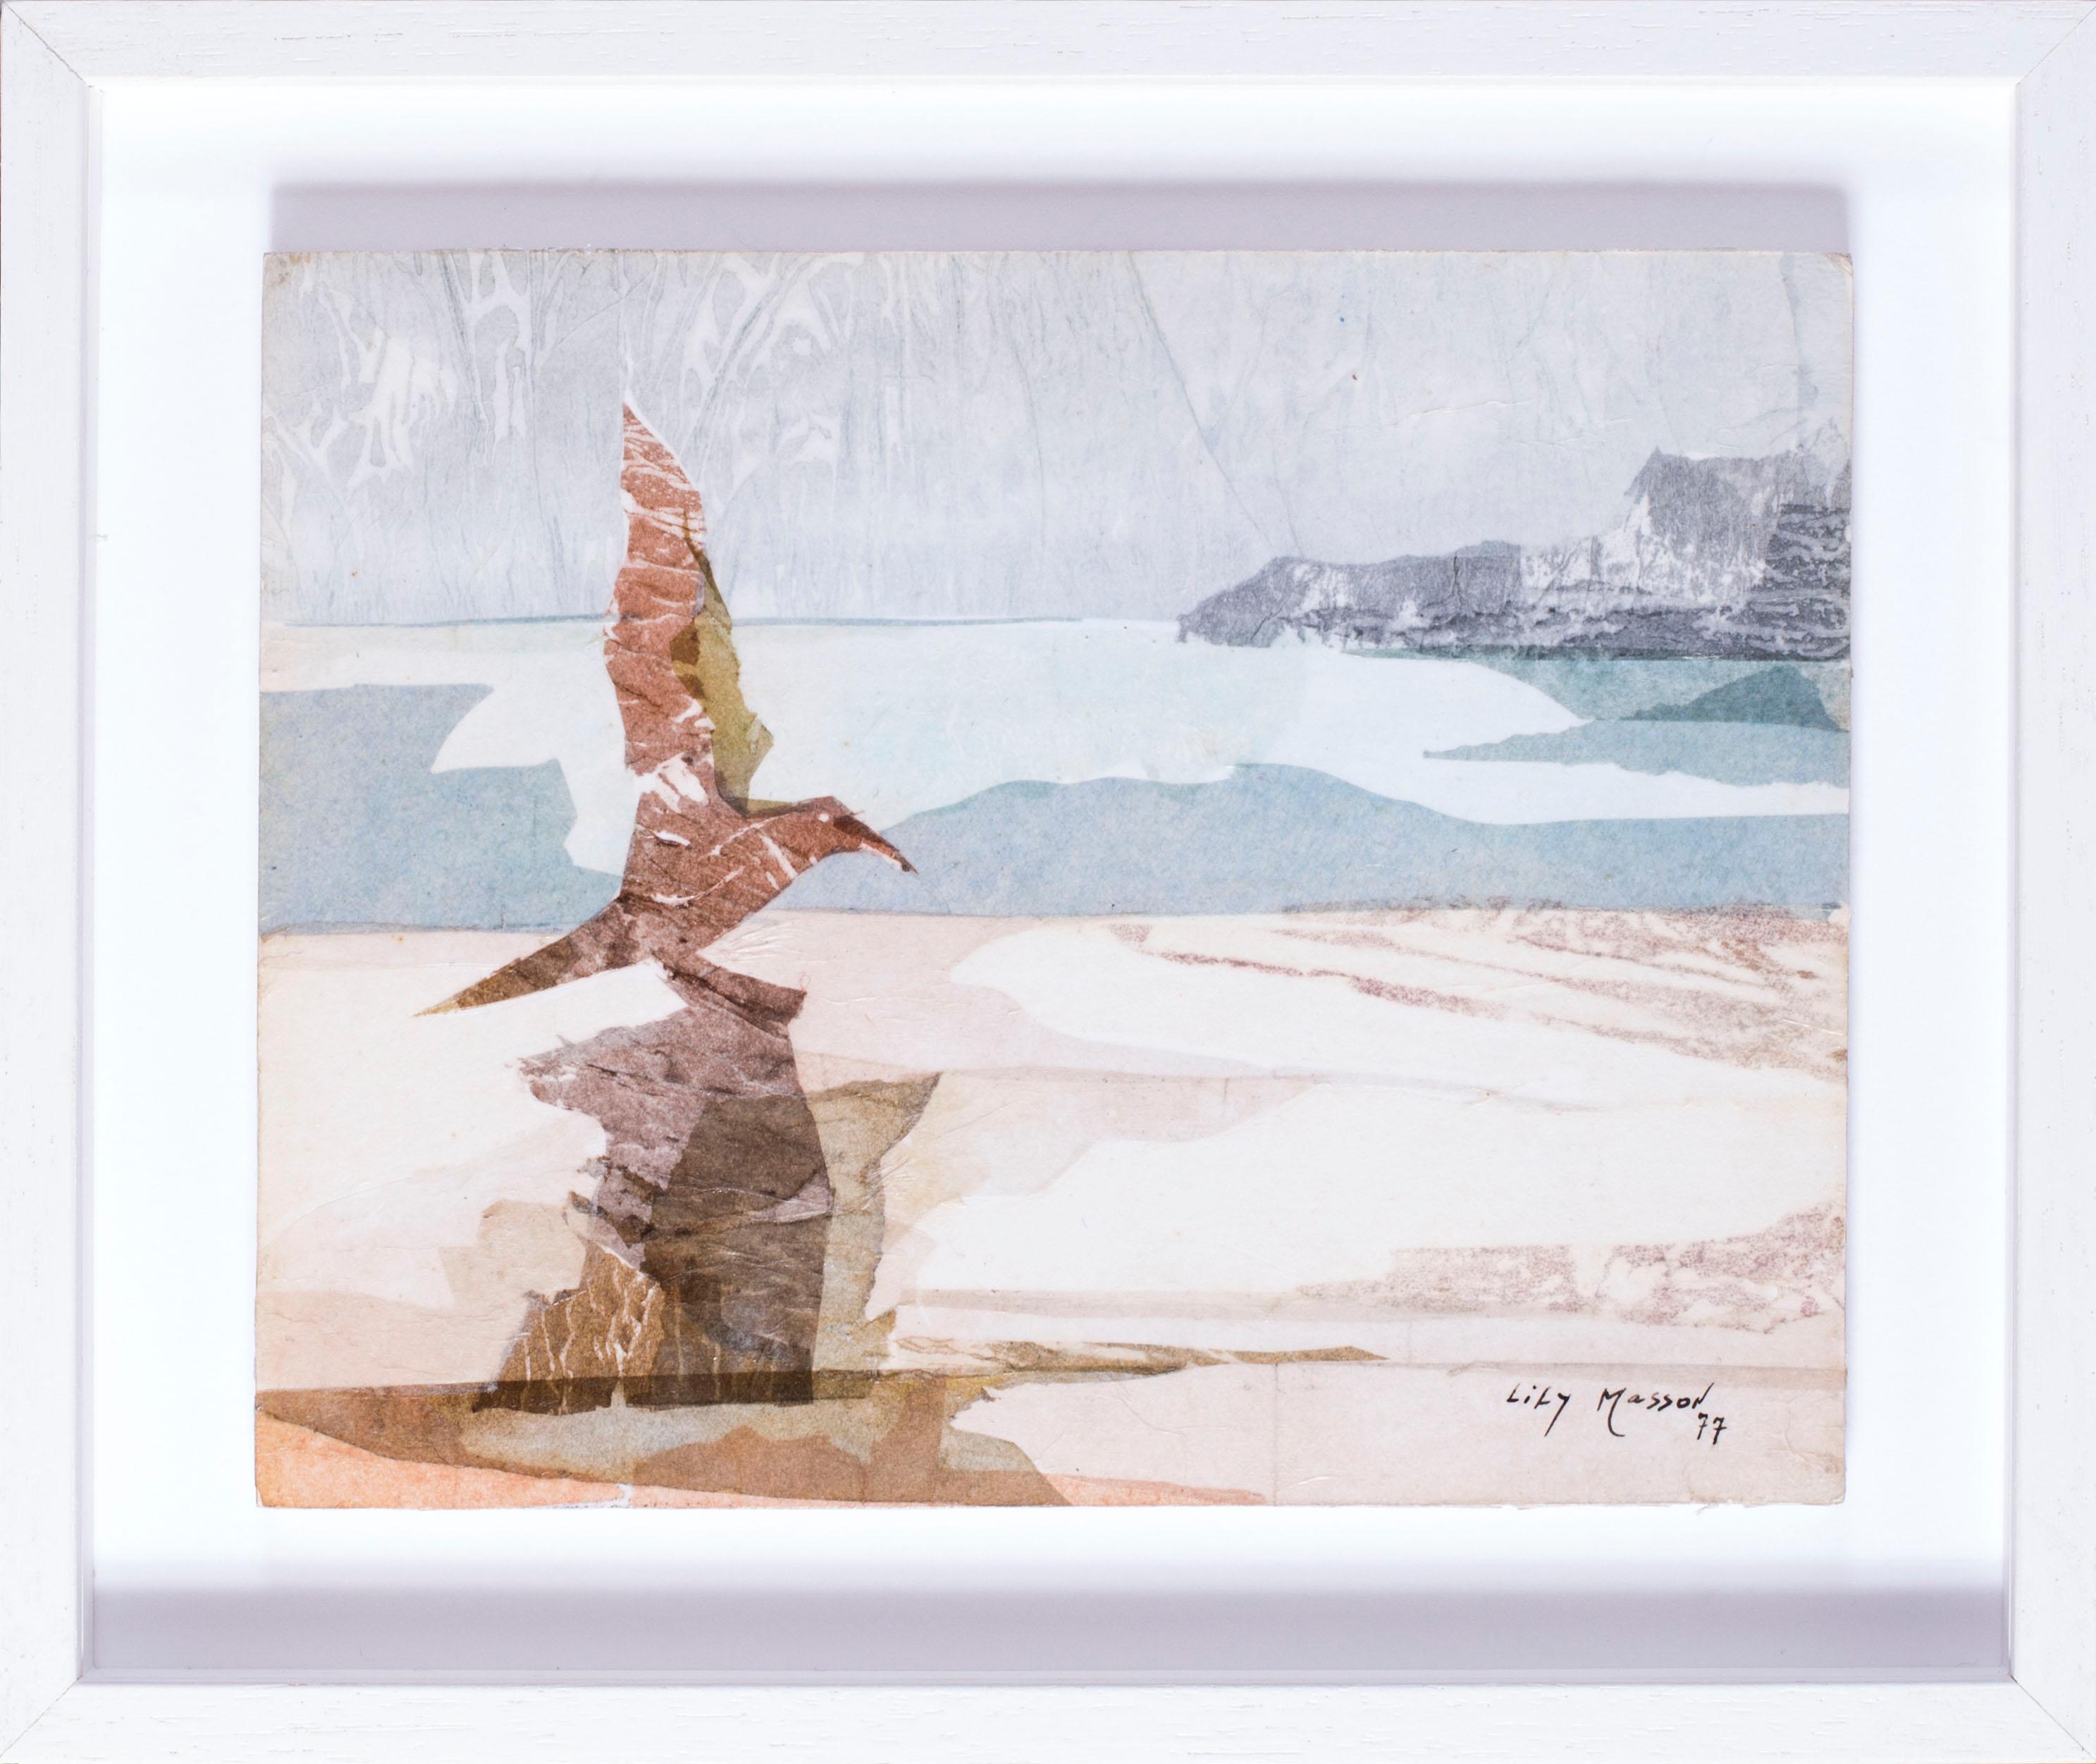 French 20th Century collage artwork of a bird on a rock on the shore by Masson - Mixed Media Art by Lily Masson